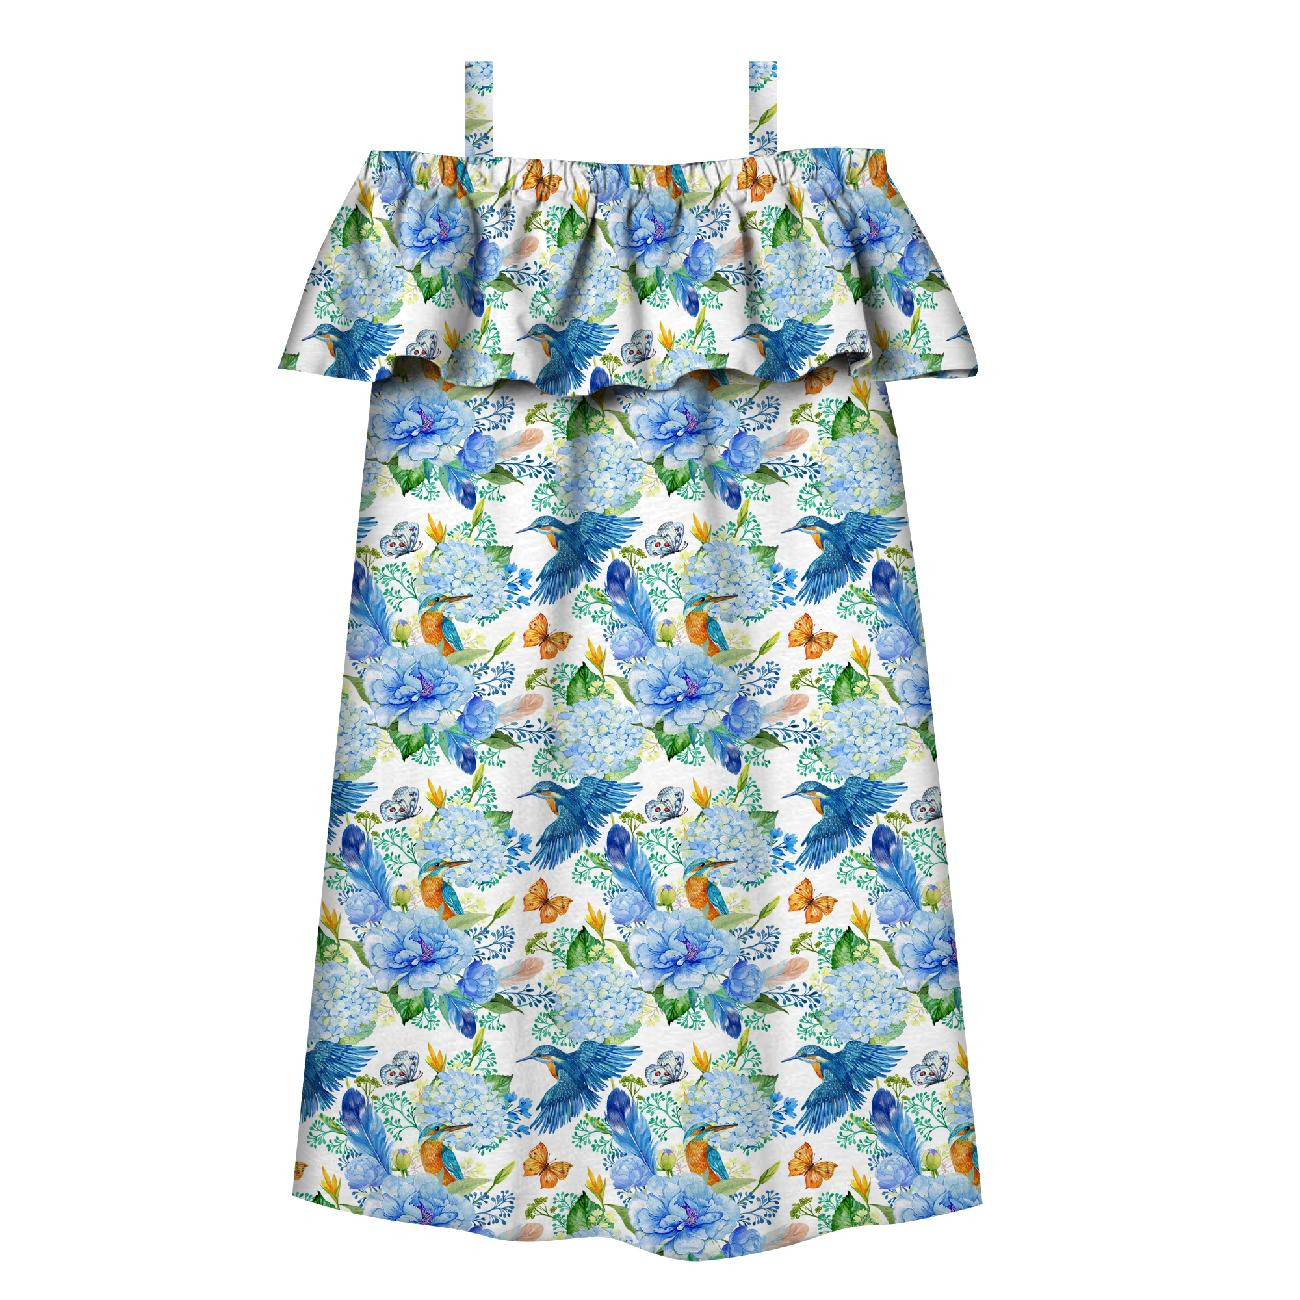 Bardot neckline dress (LILI) - KINGFISHERS AND LILACS (KINGFISHERS IN THE MEADOW) / white - sewing set